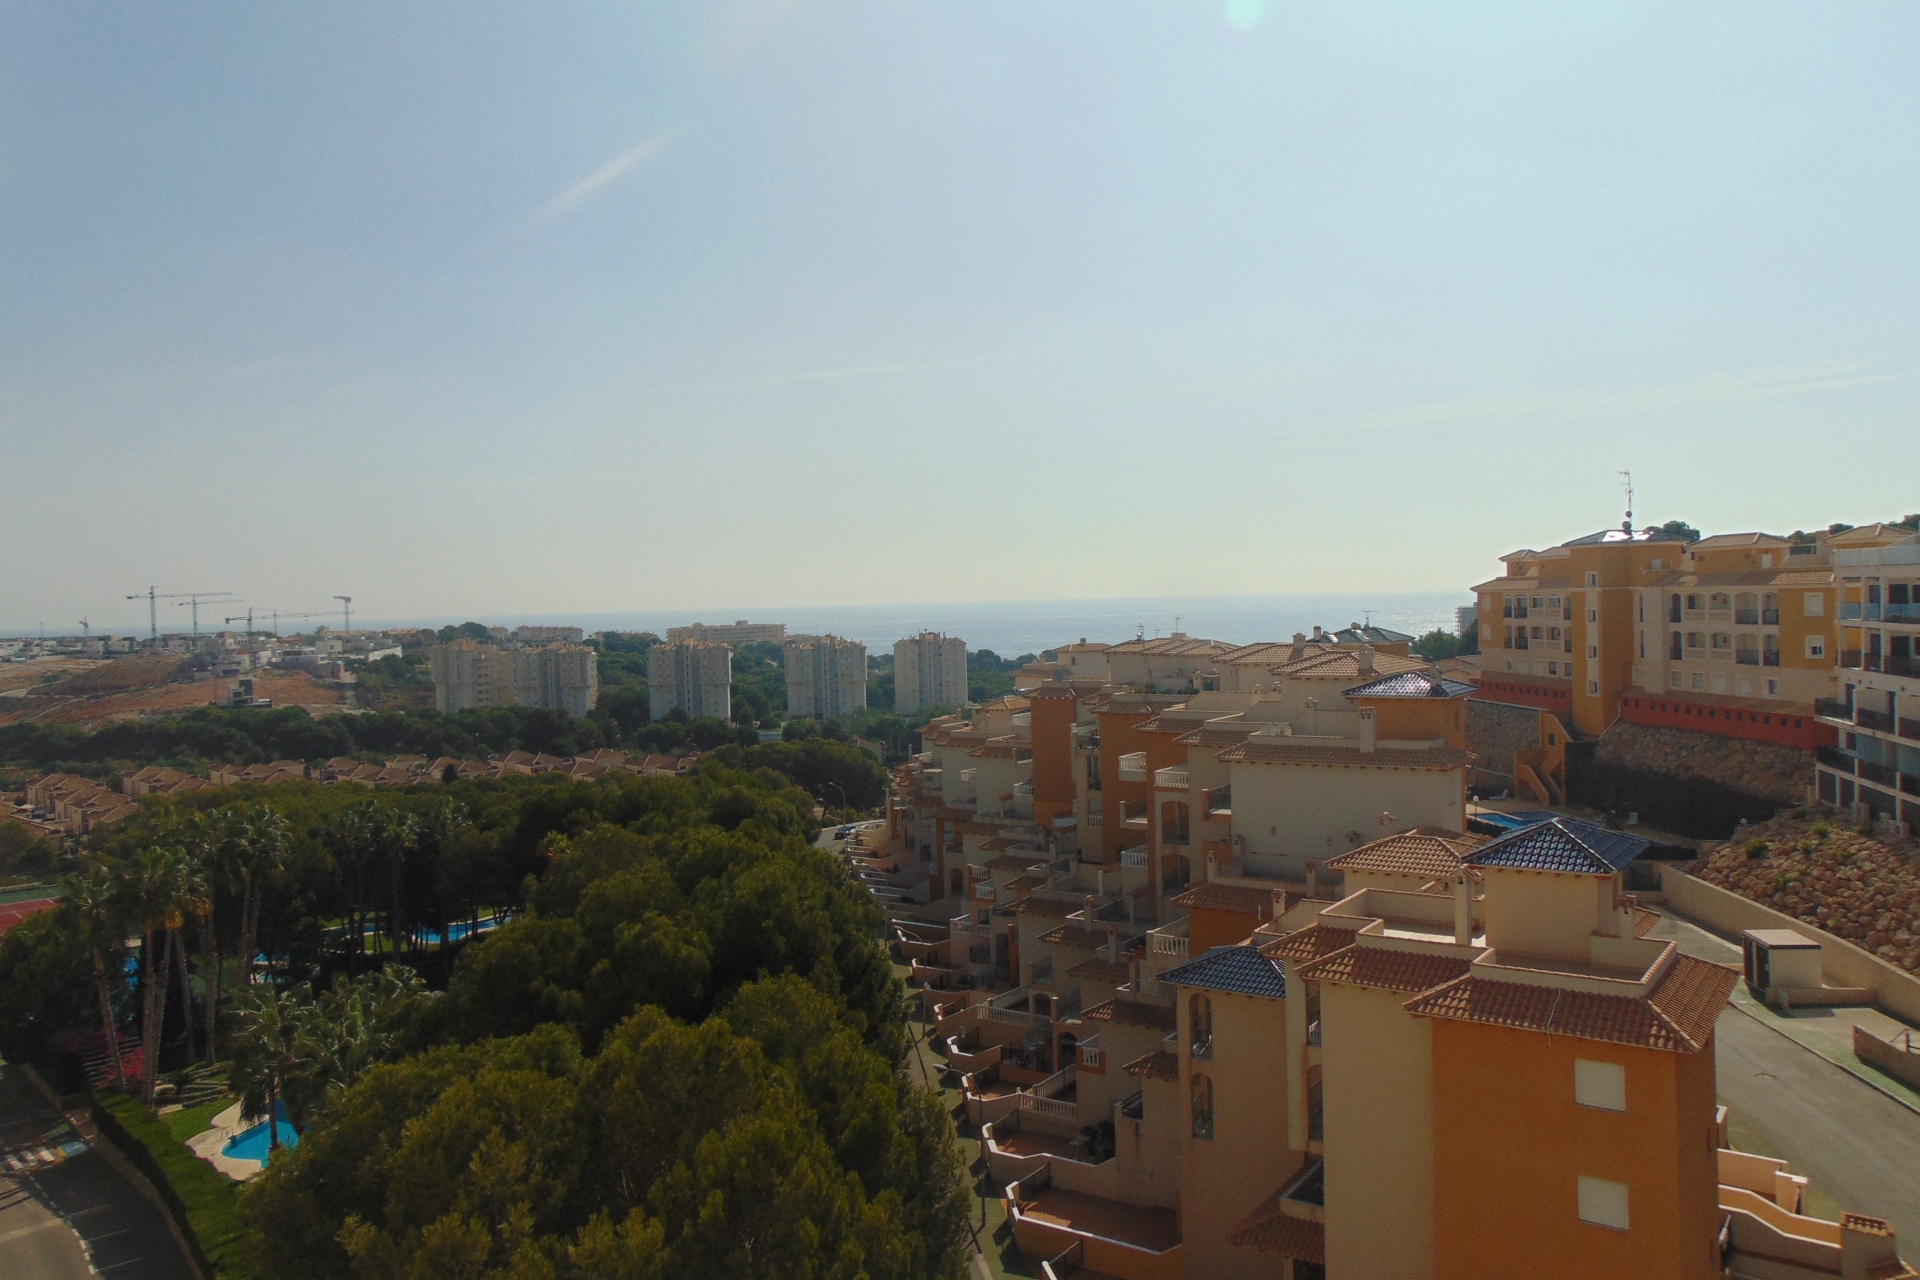 Property Sold - Apartment for sale - Orihuela Costa - Campoamor